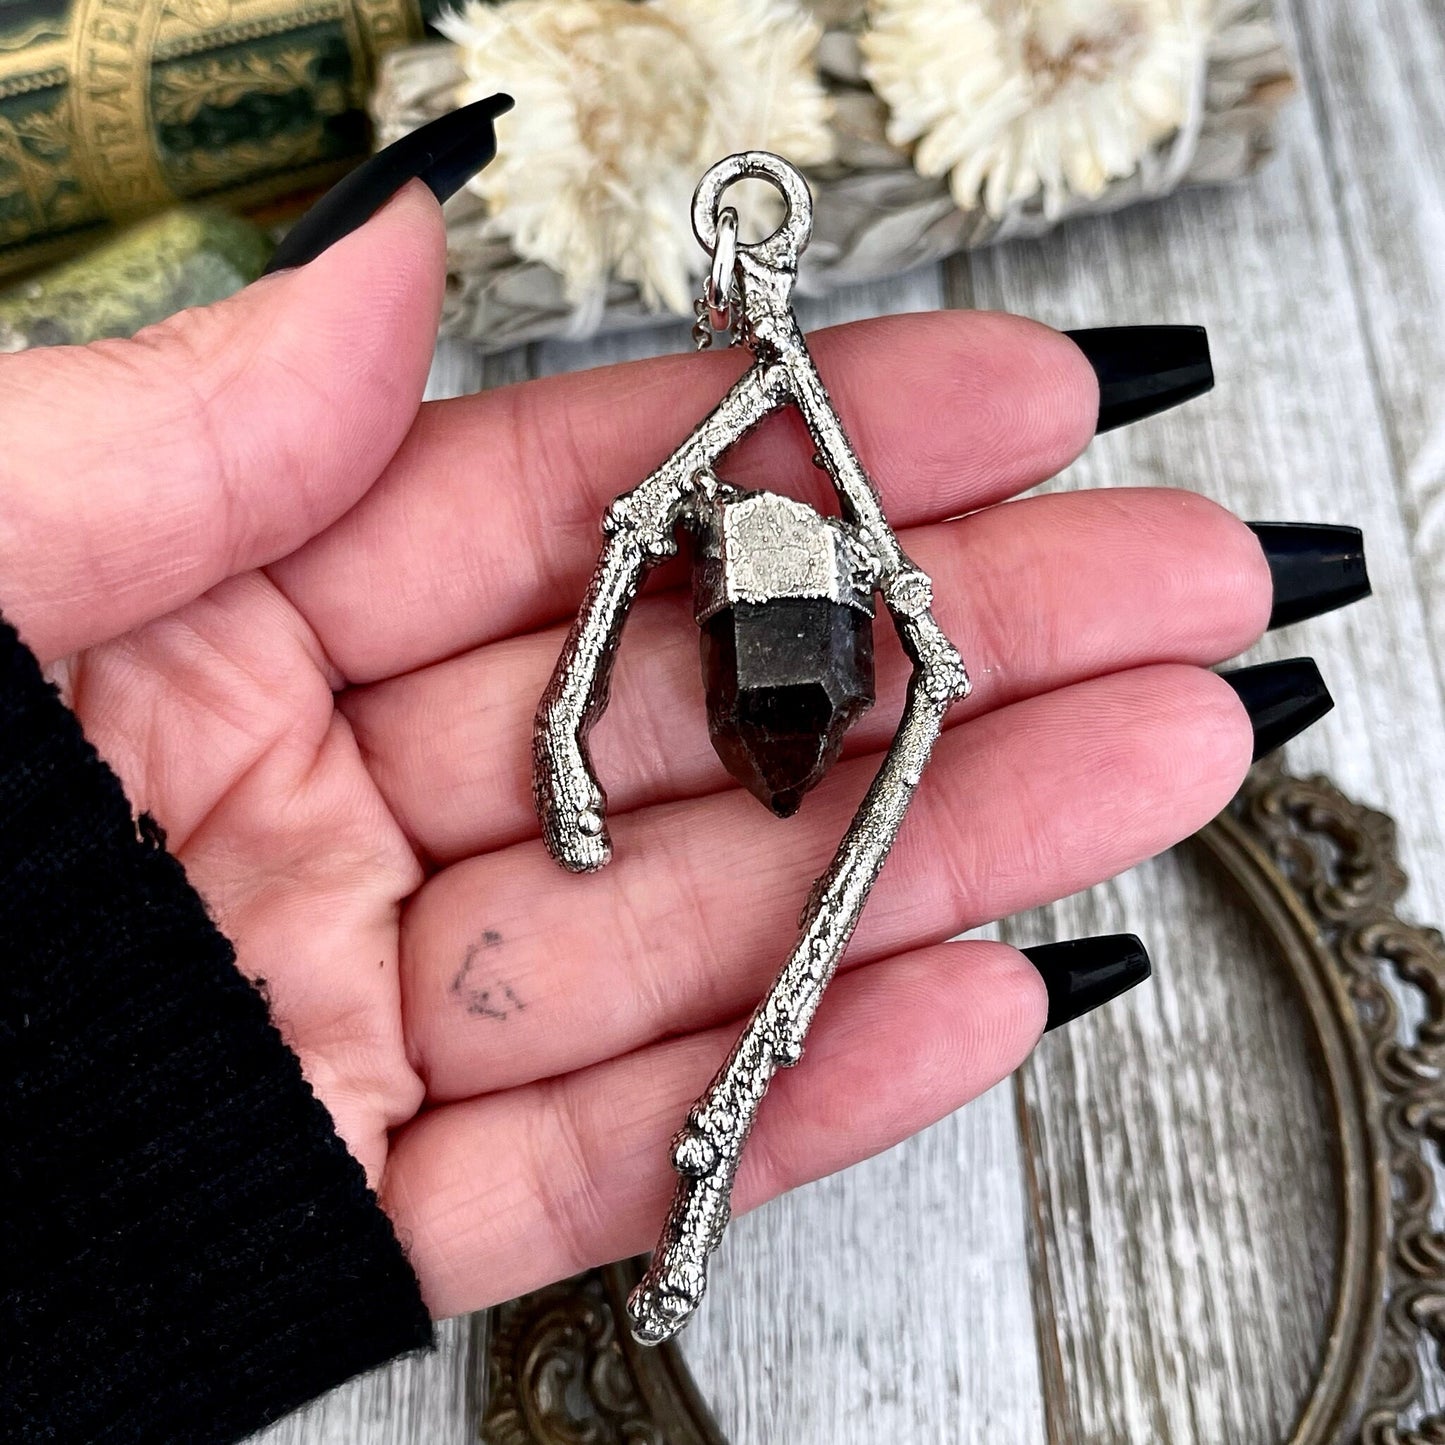 Sticks & Stones Collection- Smokey Quartz Necklace in Fine Silver // Big Crystal Necklace. Witchy Jewelry Gothic Pendant Bohemian Festival